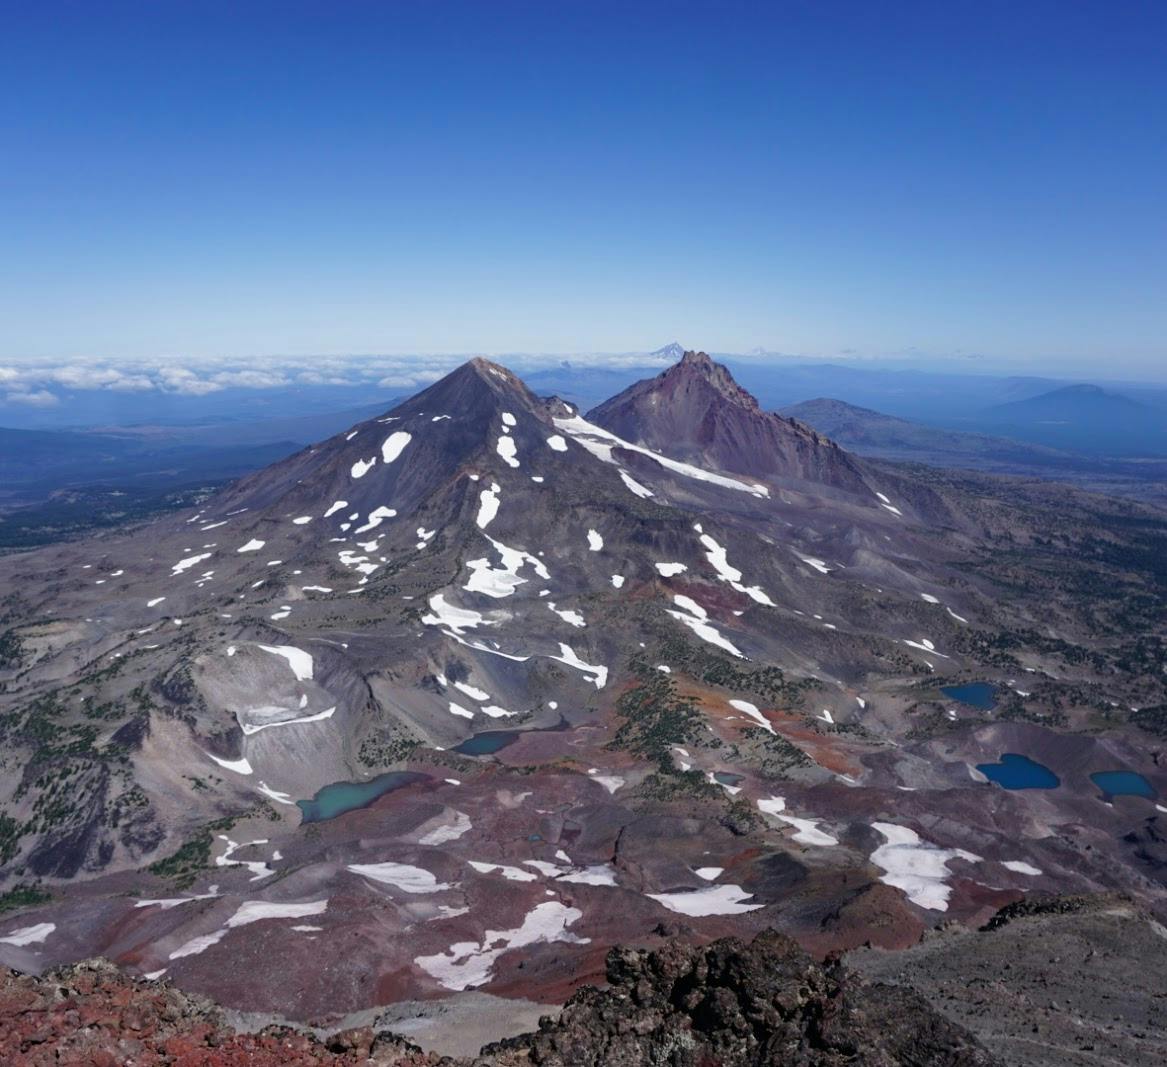 Learn about summitting the two most popular peaks in Central Oregon.